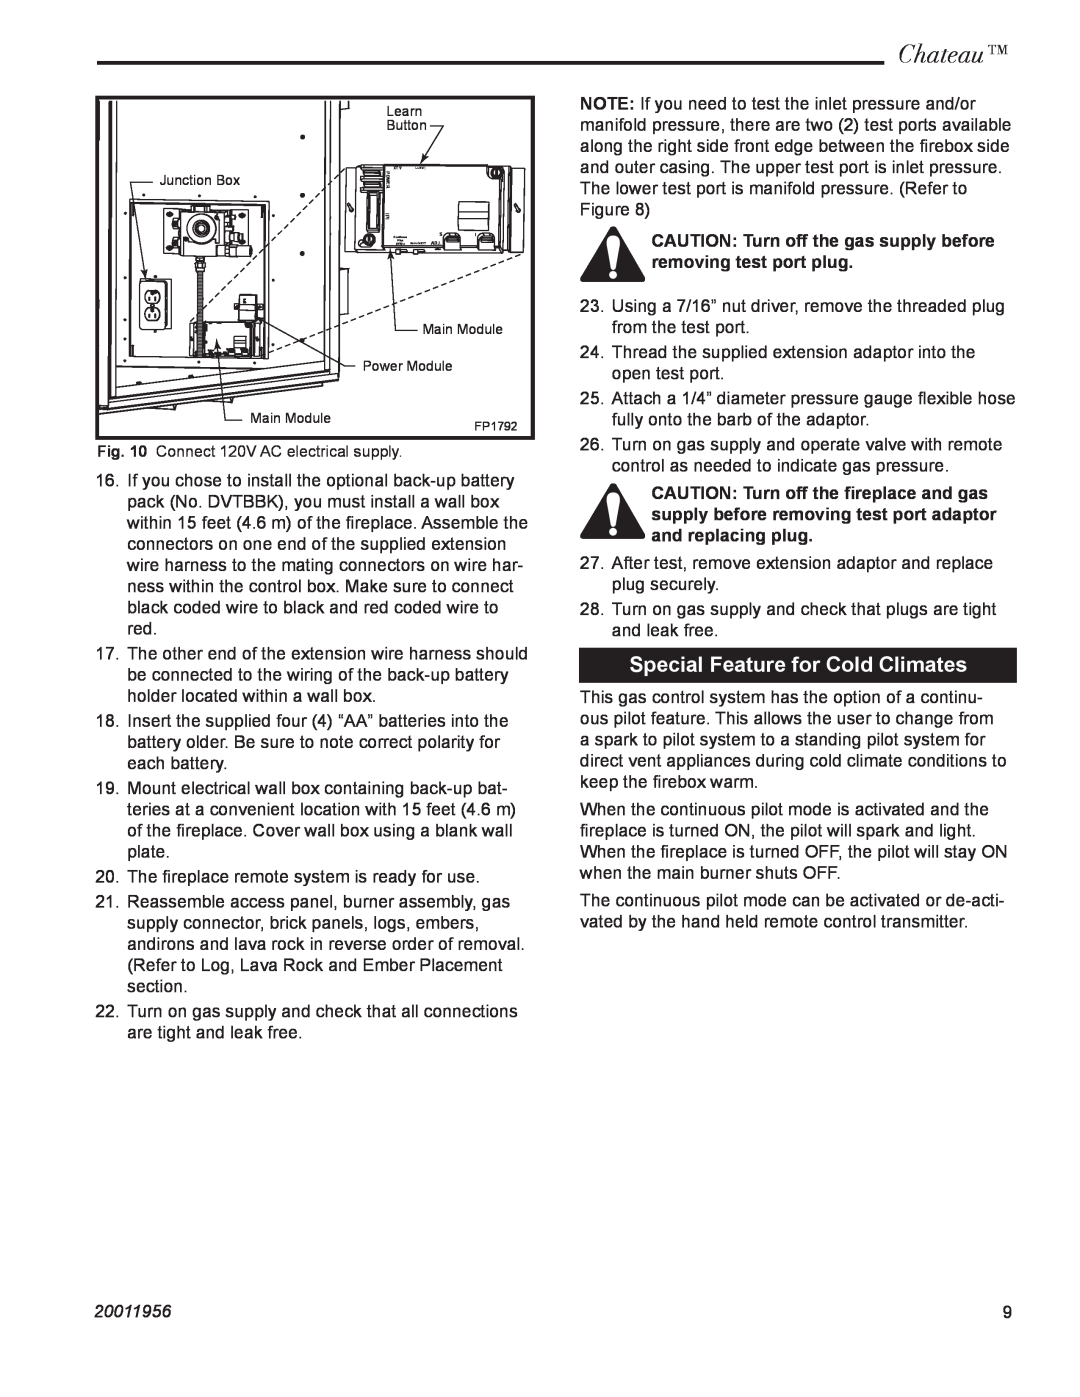 CFM Corporation DVT38IN, DVT44IN installation instructions Special Feature for Cold Climates, Chateau, 20011956 